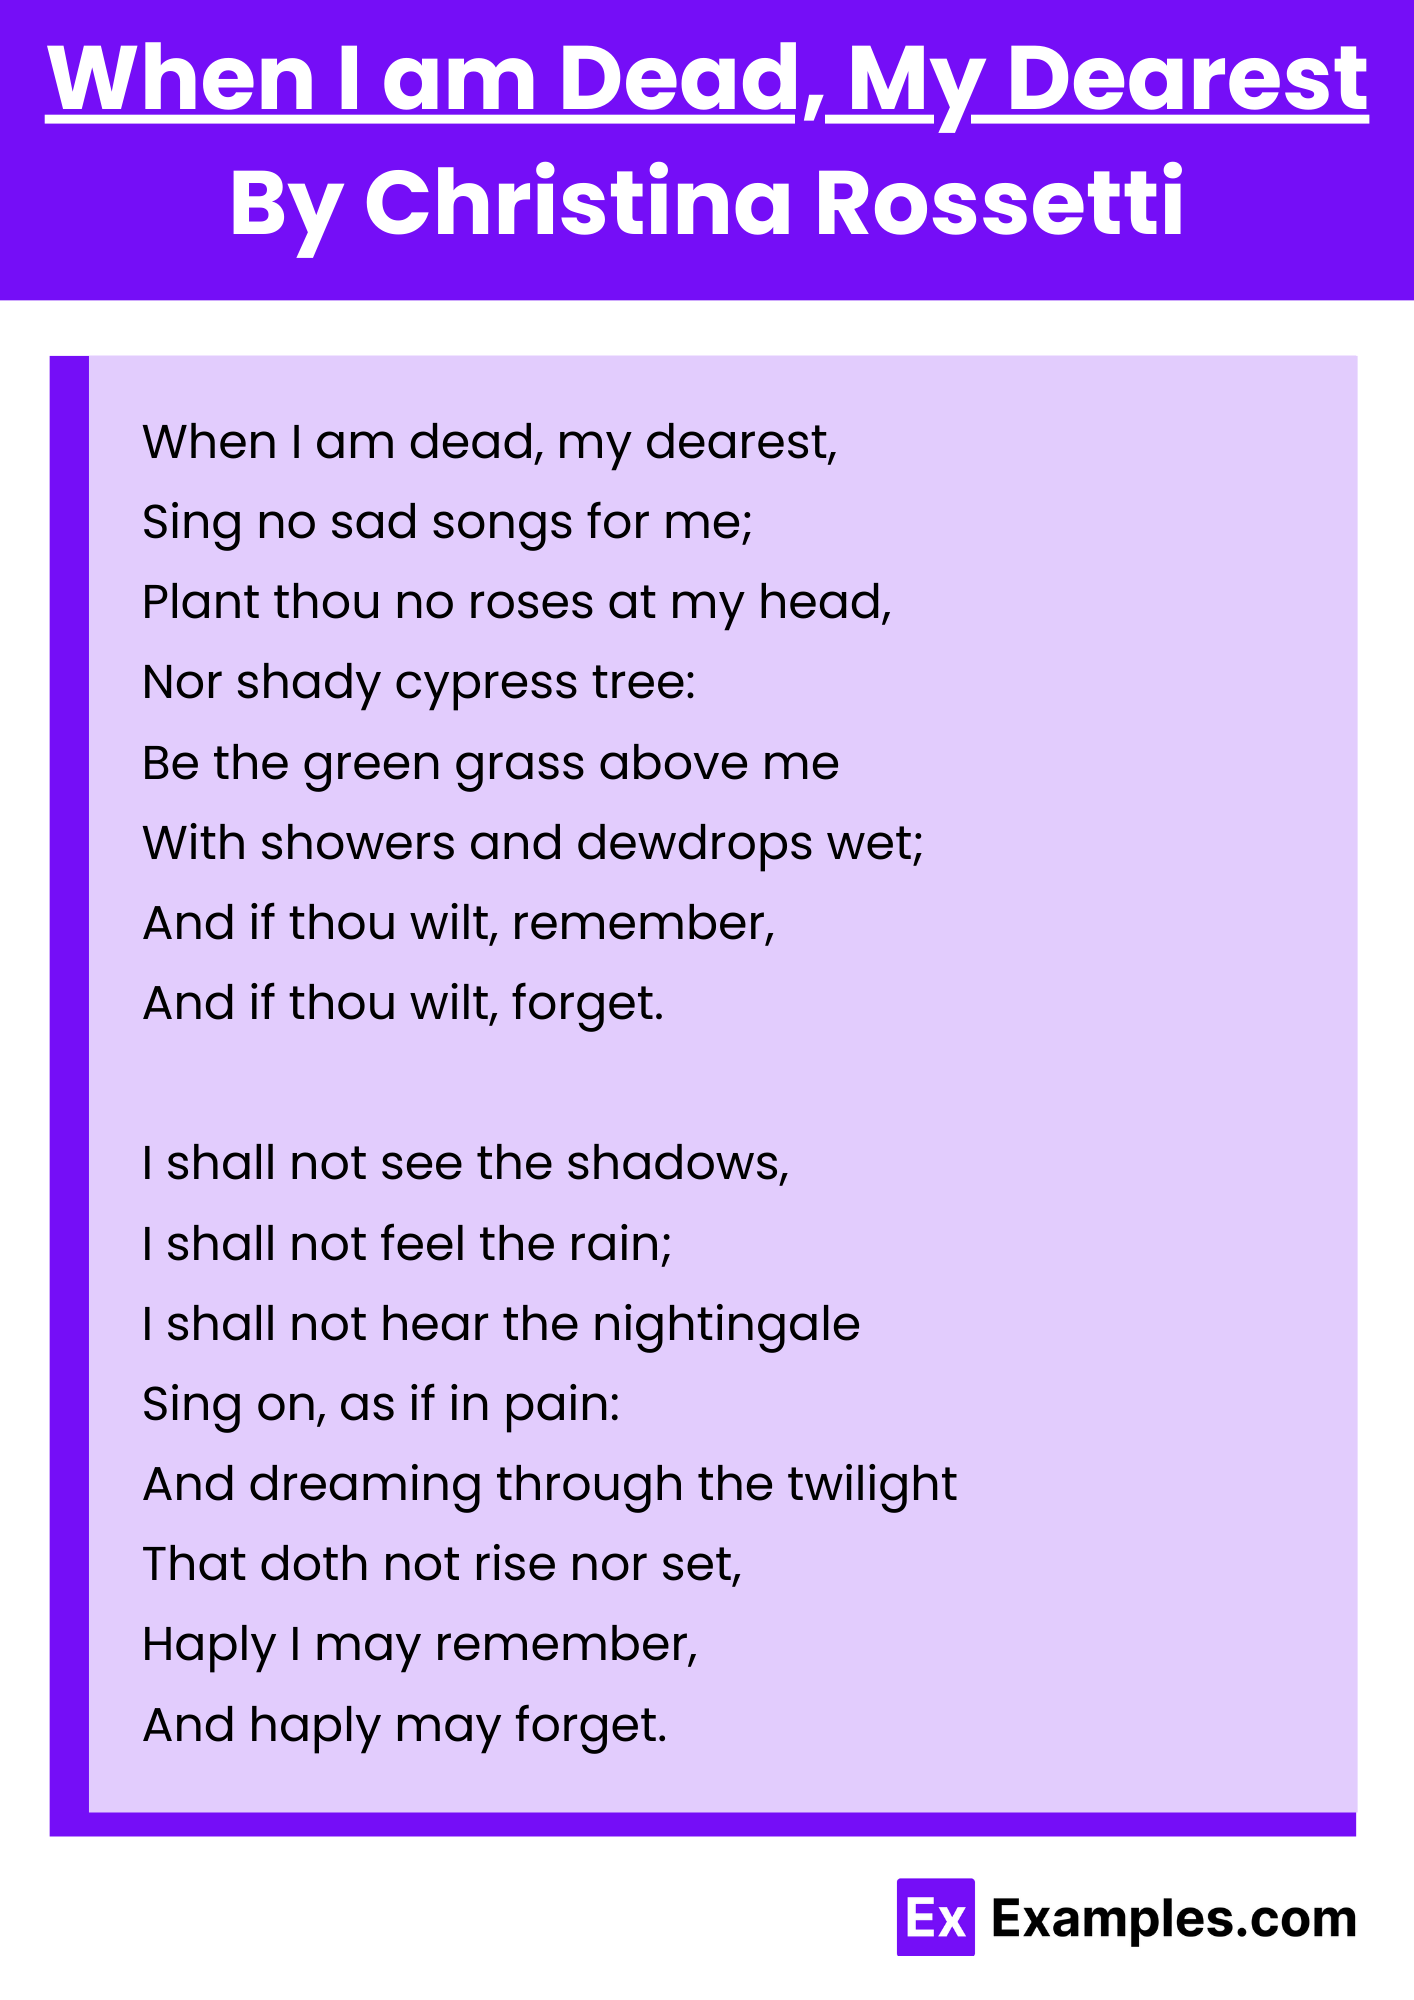 When I am Dead, My Dearest By Christina Rossetti